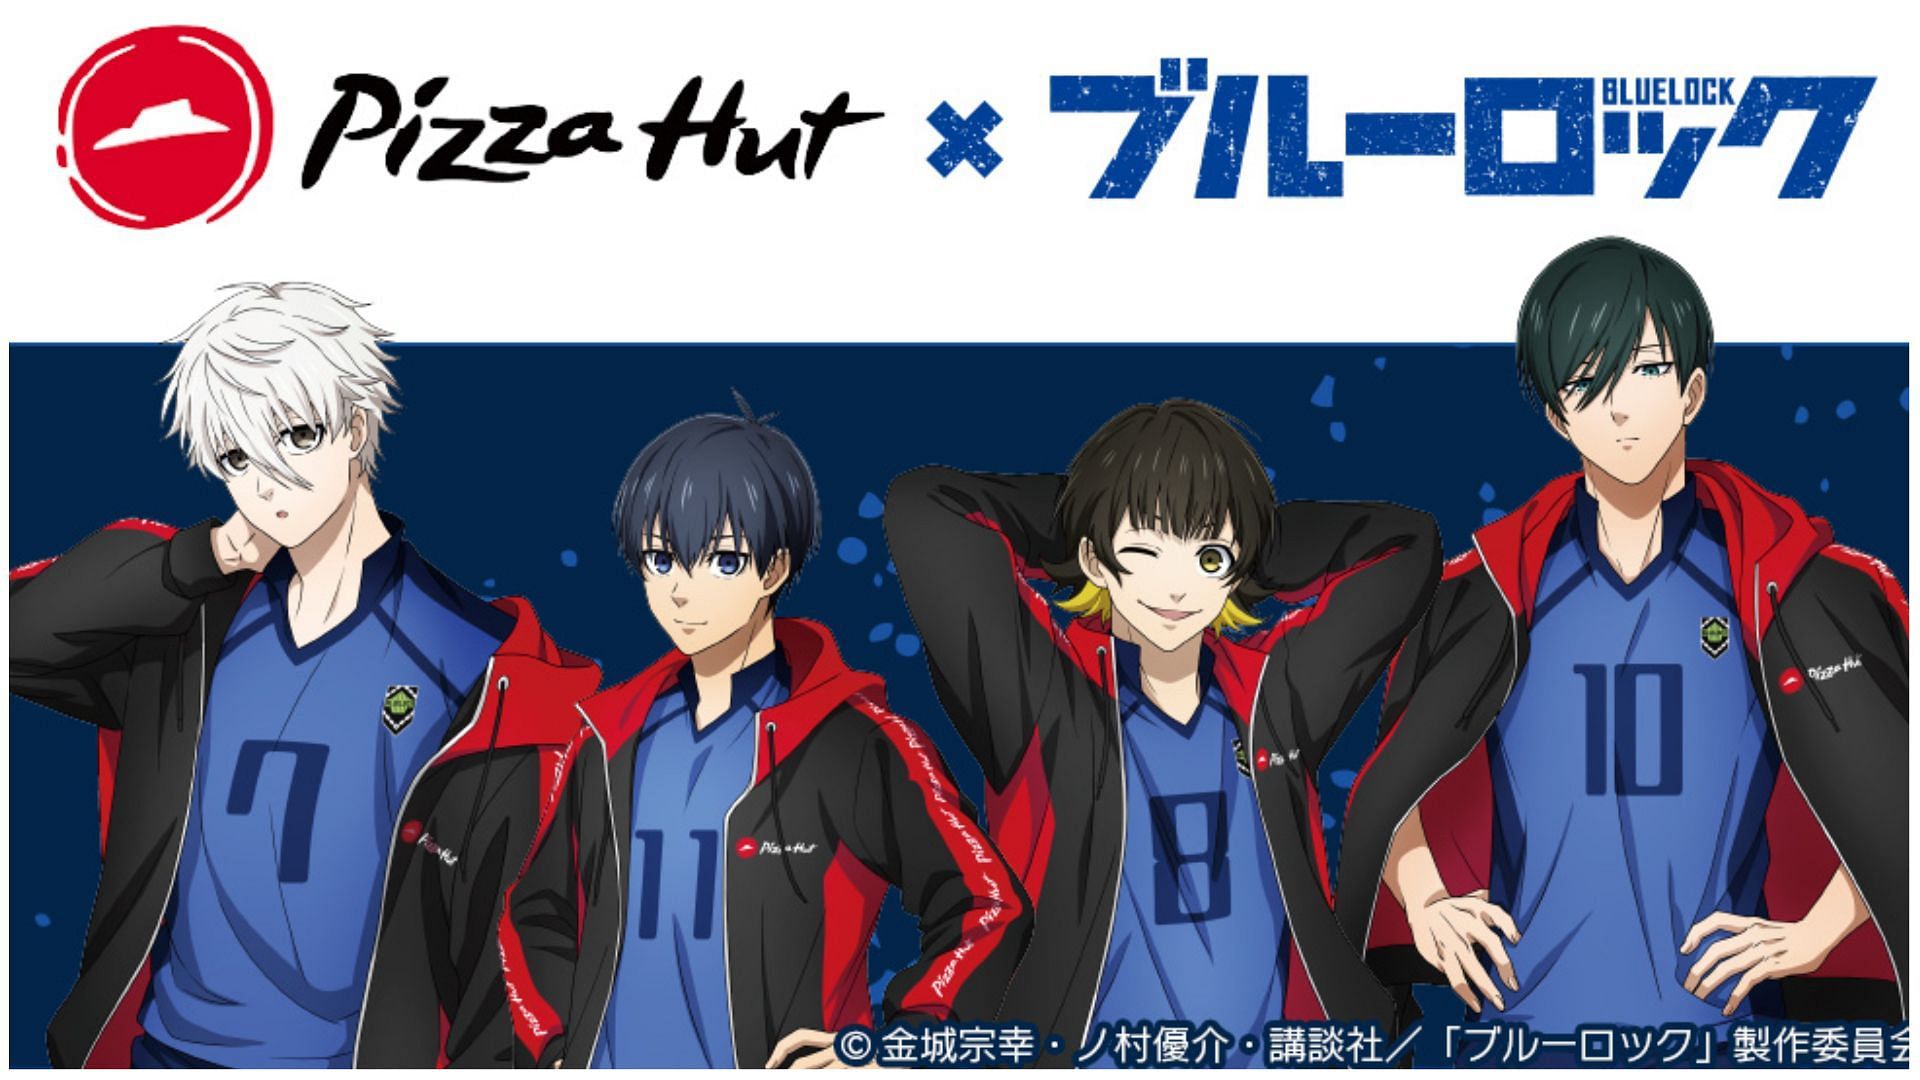 Blue Lock X Pizza Hut collaboration entices anime lovers and foodies alike